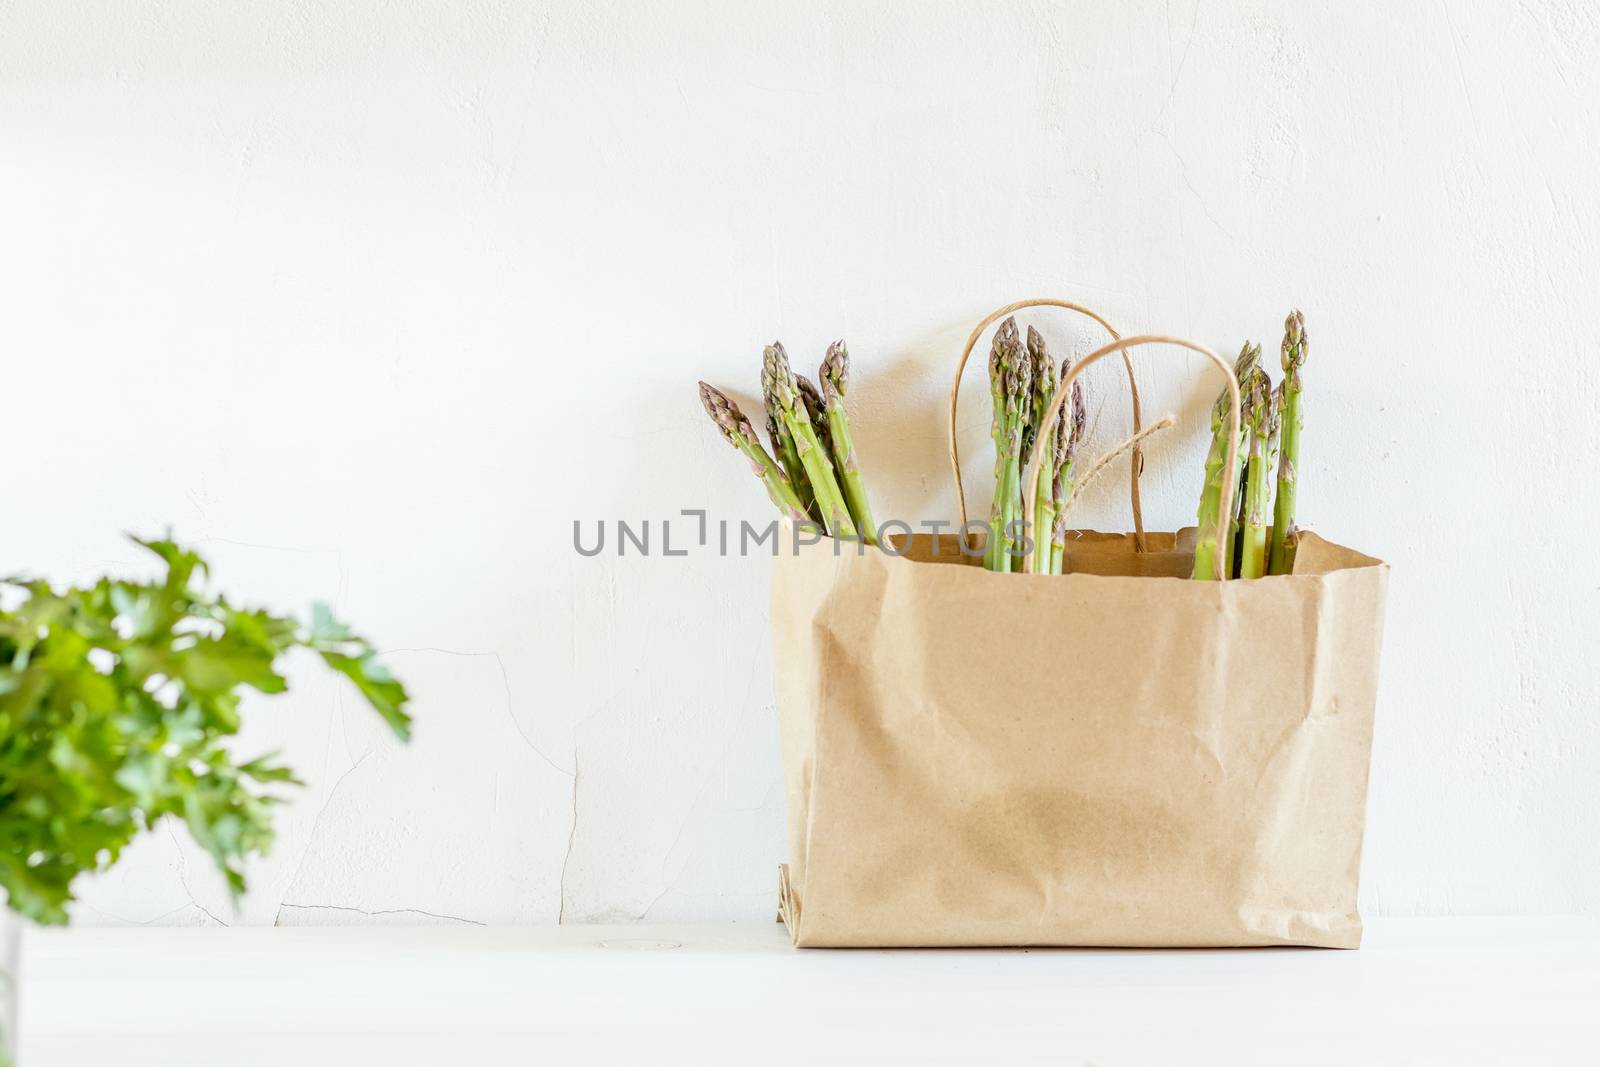 Bunches of fresh asparagus in a paper bag on white cracked wallbackground. Copy space